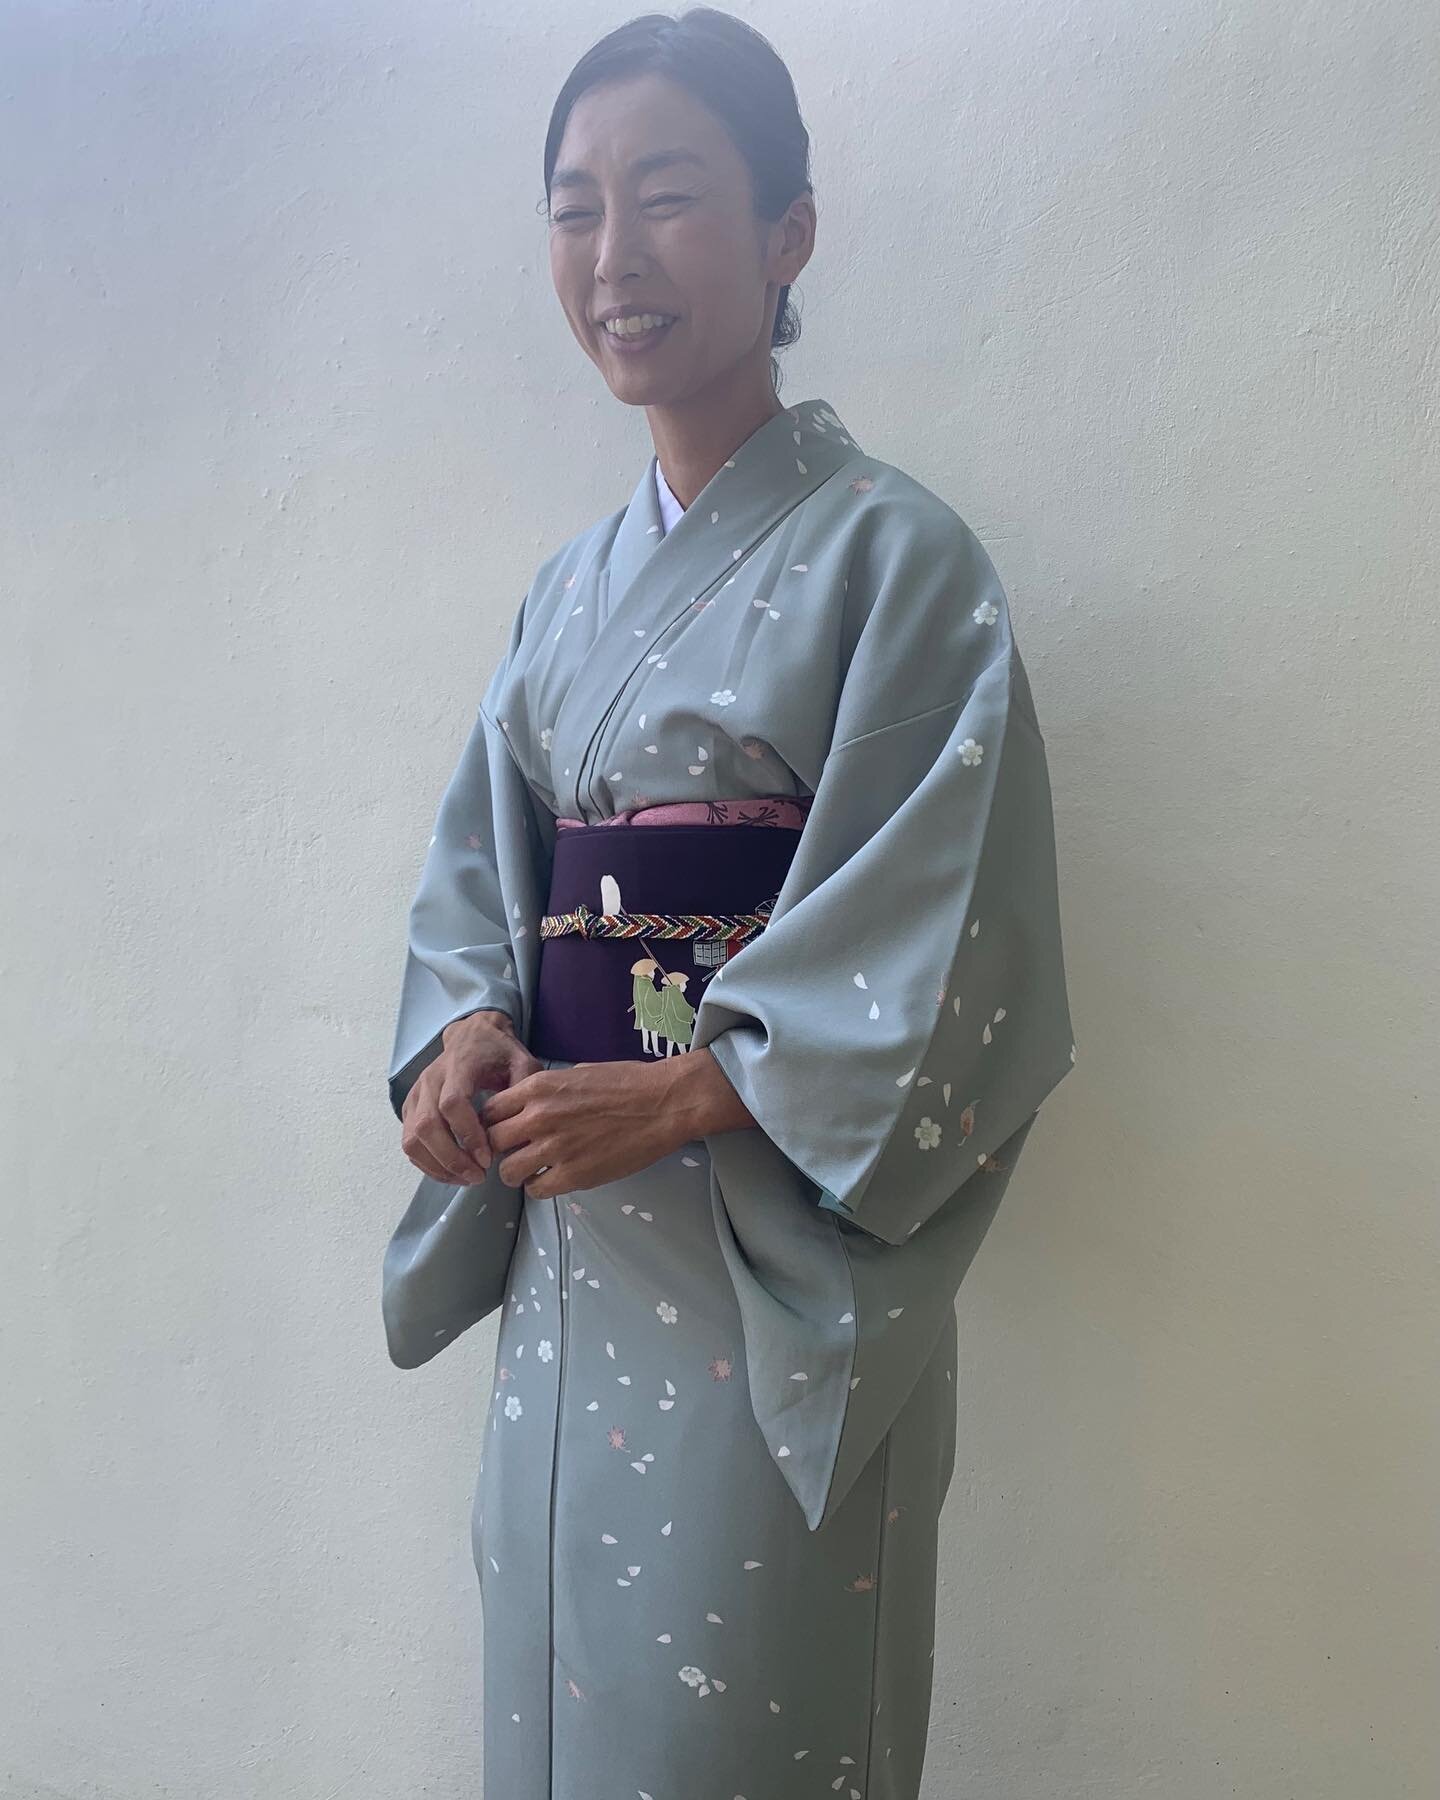 November 3rd is Culture Day &ldquo;Bunka no Hi.&rdquo; The history of this national holiday began November 3, 1868. The kimono has been a part of Japanese culture since the Nara Period. 
Kimonos can be formal or casual. This kimono is called &ldquo;K